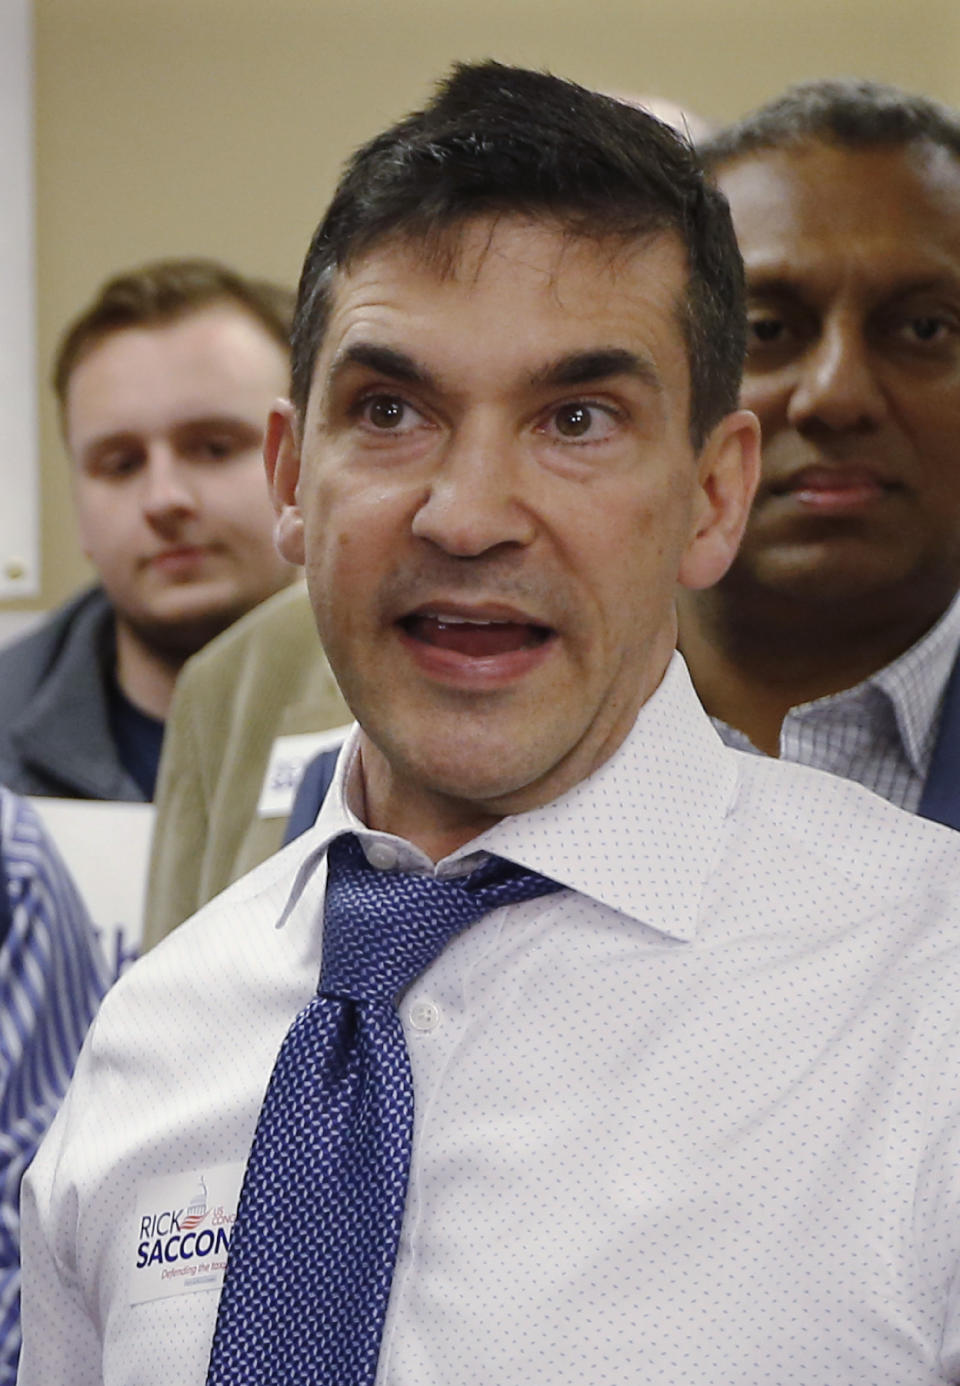 FILE - In this March 9, 2018 file photo, Val DiGiorgio, the Pennsylvania Republican Party chairman, talks with reporters during a campaign stop for Rick Saccone, at the party call center in Pittsburgh. The state G.O.P. announced Tuesday, June 25, 2019 that DiGiorgio is stepping down following a published report that he had traded sexually charged text messages with a Philadelphia City Council candidate and also sent her an explicit photo of himself. (AP Photo/Keith Srakocic, FILE)